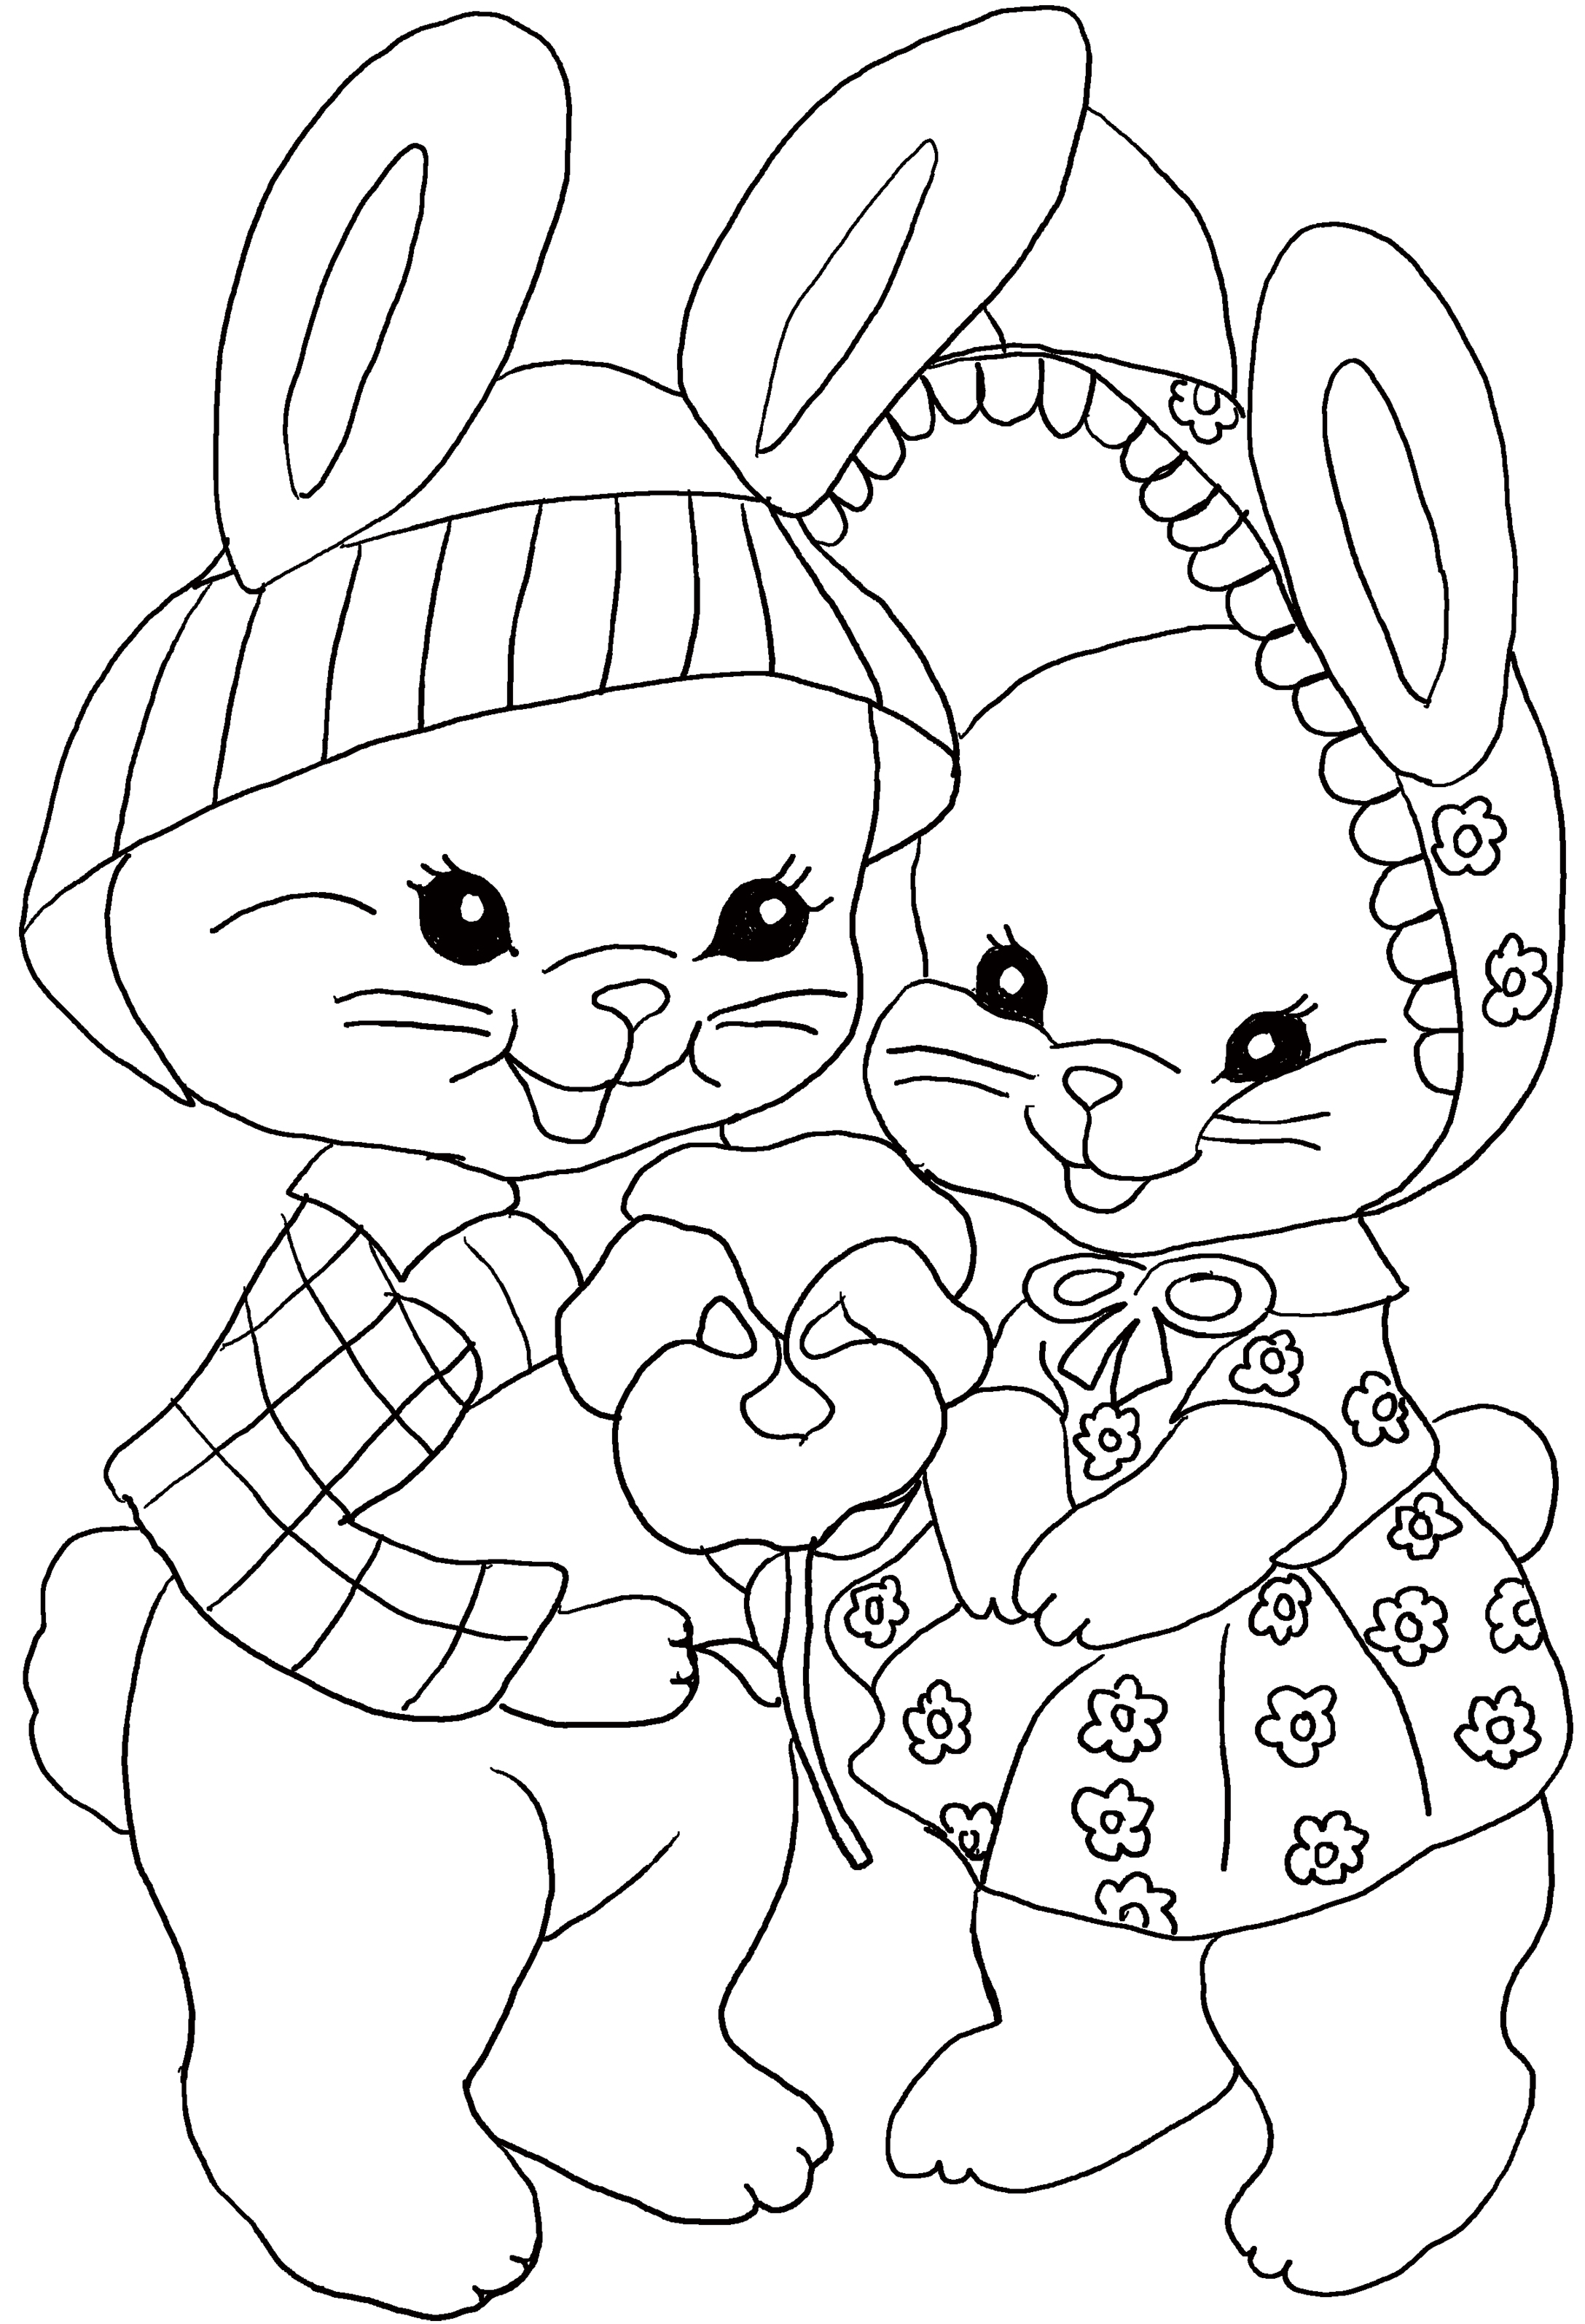 Download Free Easter Coloring Pages for Kids: High Printing Quality